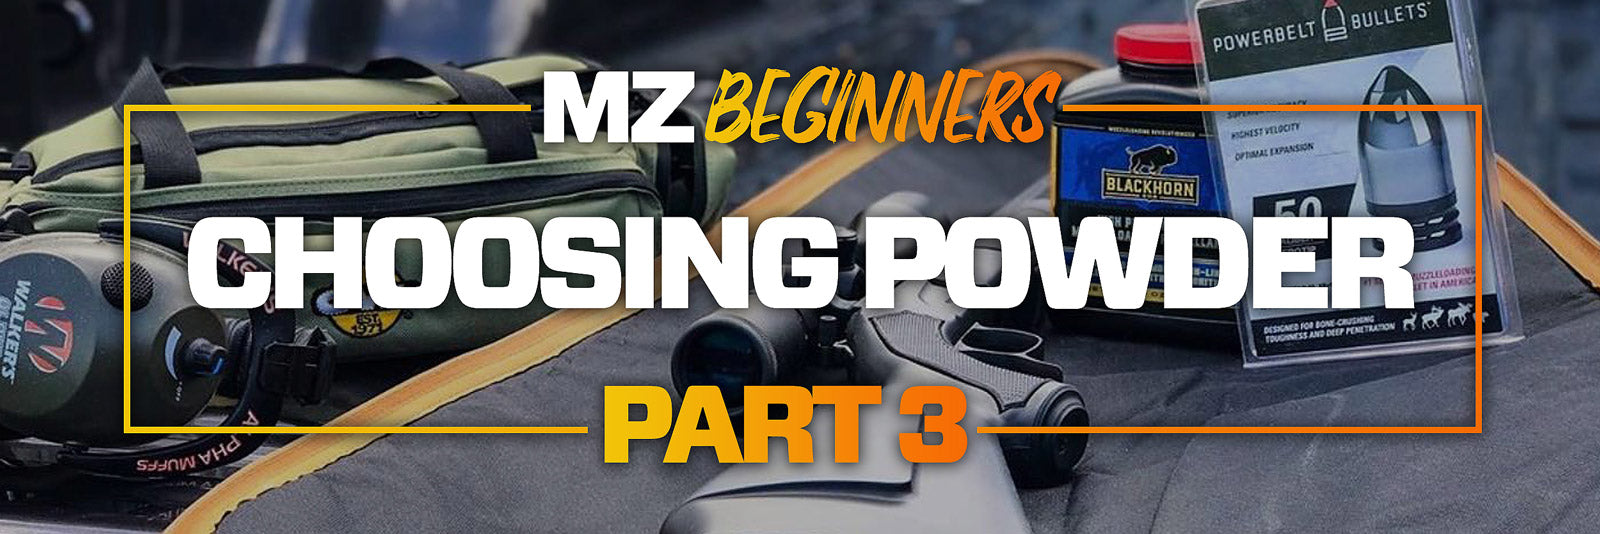 Selecting The Right Powder - The Beginners Guide To Muzzleloading - Part 3